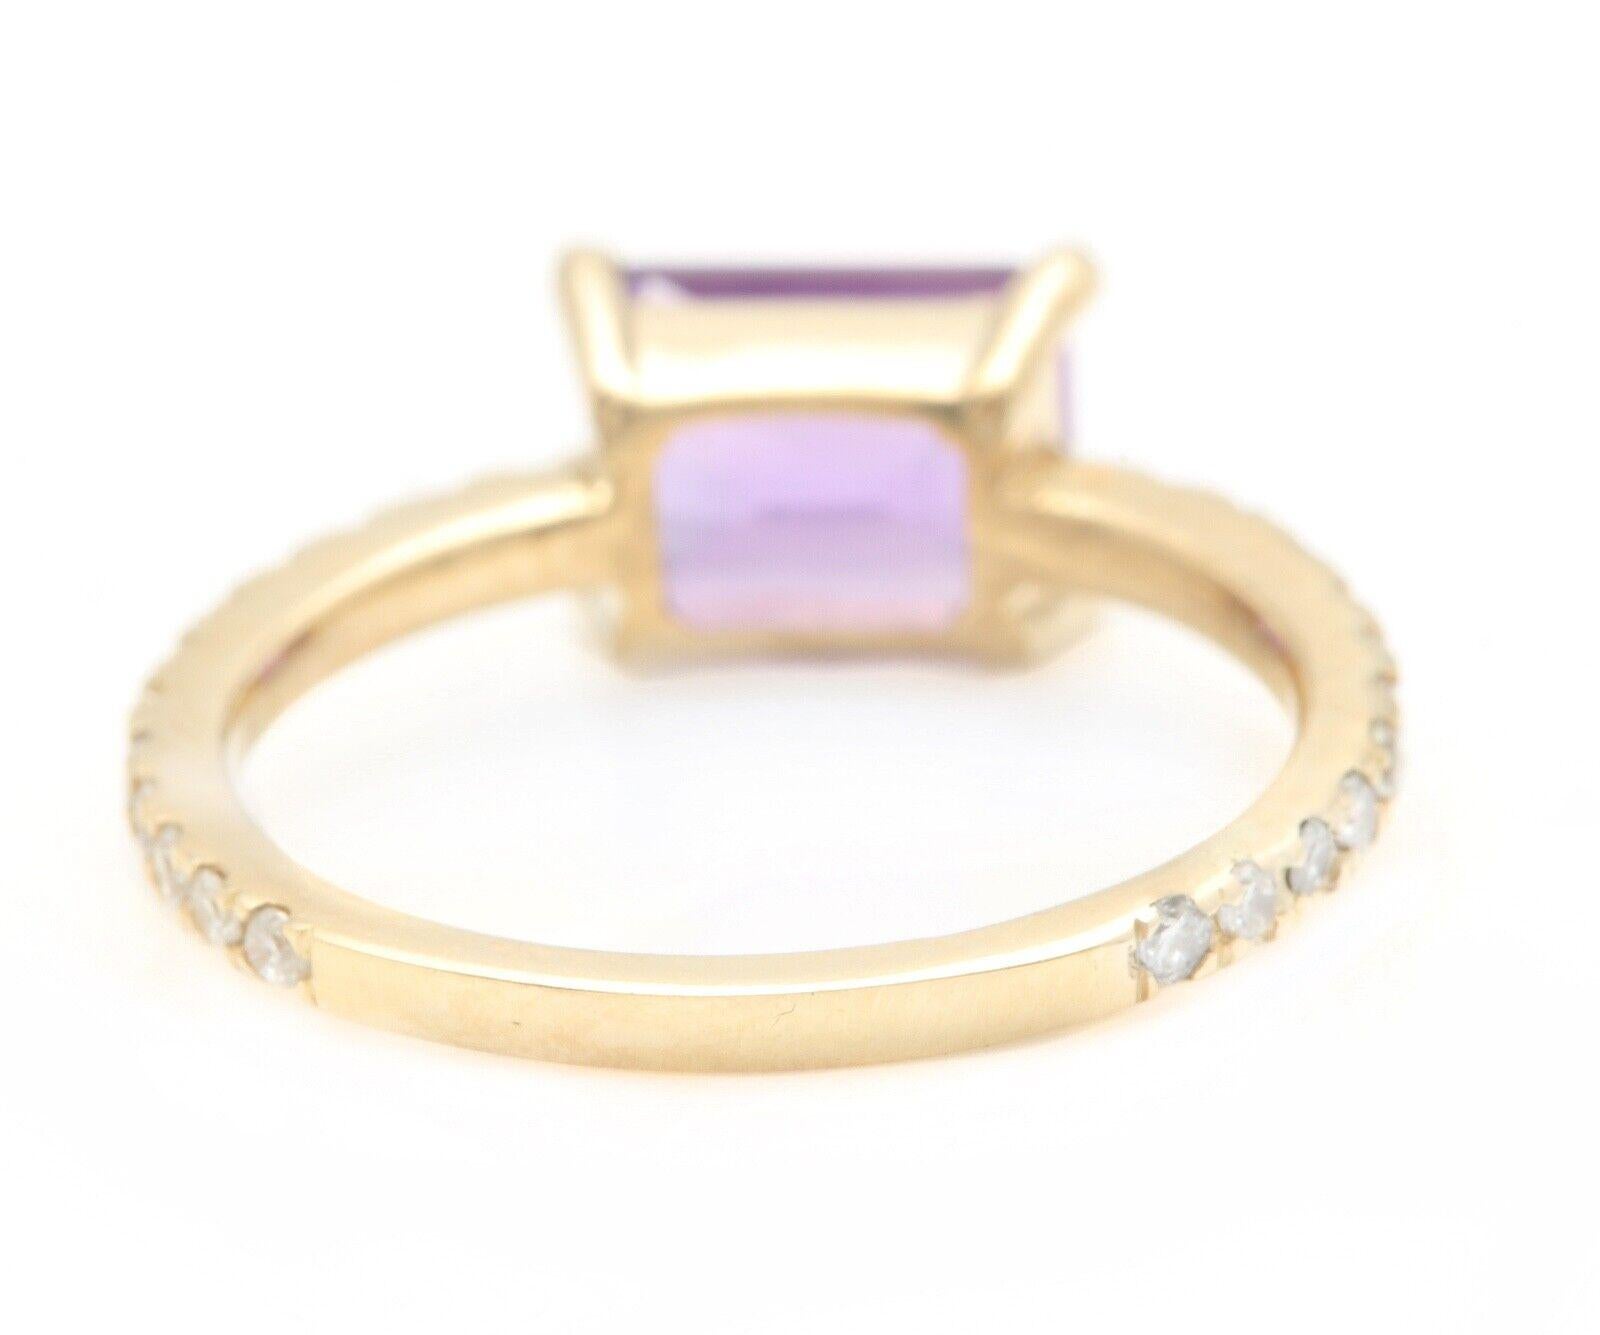 1.80 Carats Natural Amethyst and Diamond 14K Solid Yellow Gold Ring

Suggested Replacement Value: $2,000.00

Total Natural Emerald Cut Amethyst Weights: Approx. 1.50 Carats 

Amethyst Measures: Approx. 8.00 x 6.00mm

Natural Round Diamonds Weight: